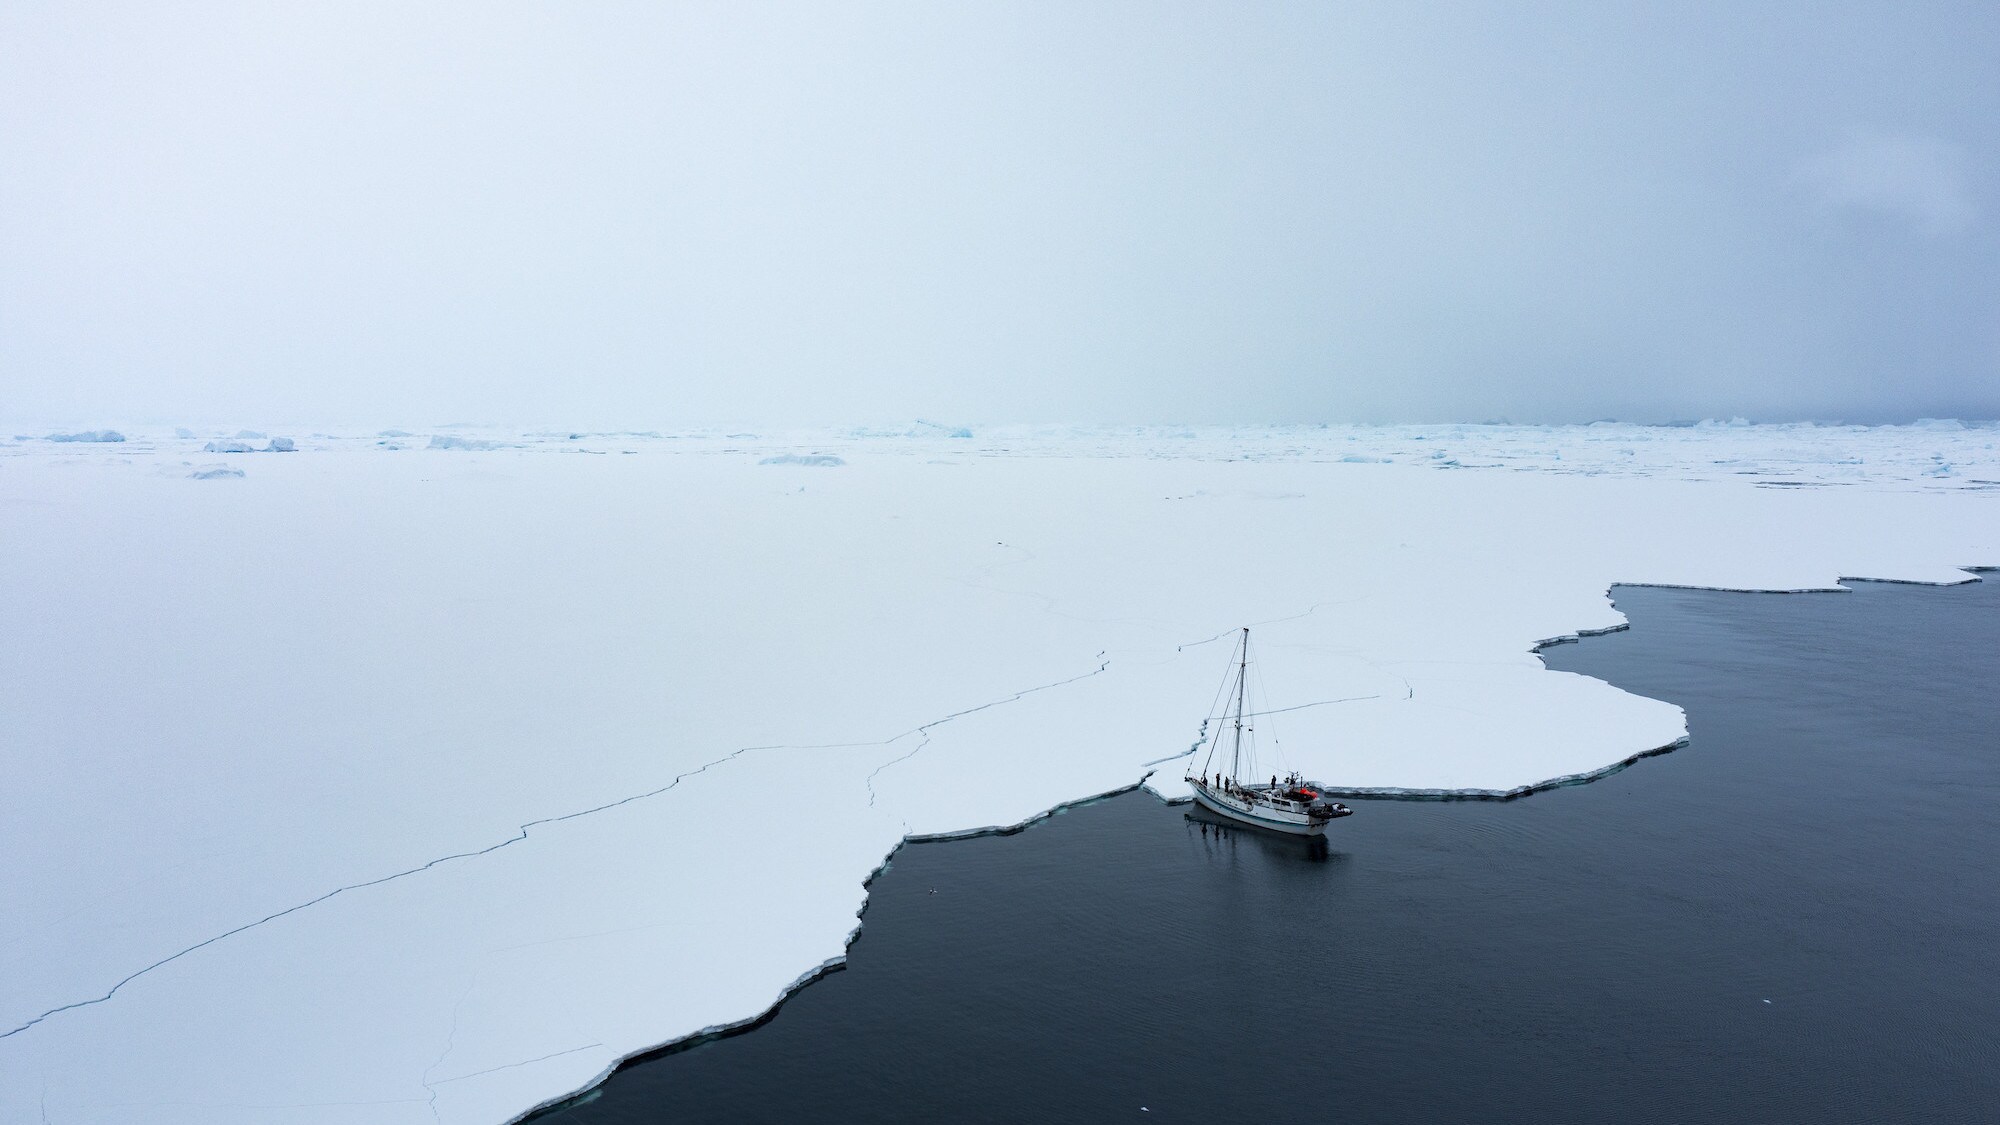 Aerial shot of the Australis at the edge of the ice. (credit: National Geographic for Disney+/Bertie Gregory)